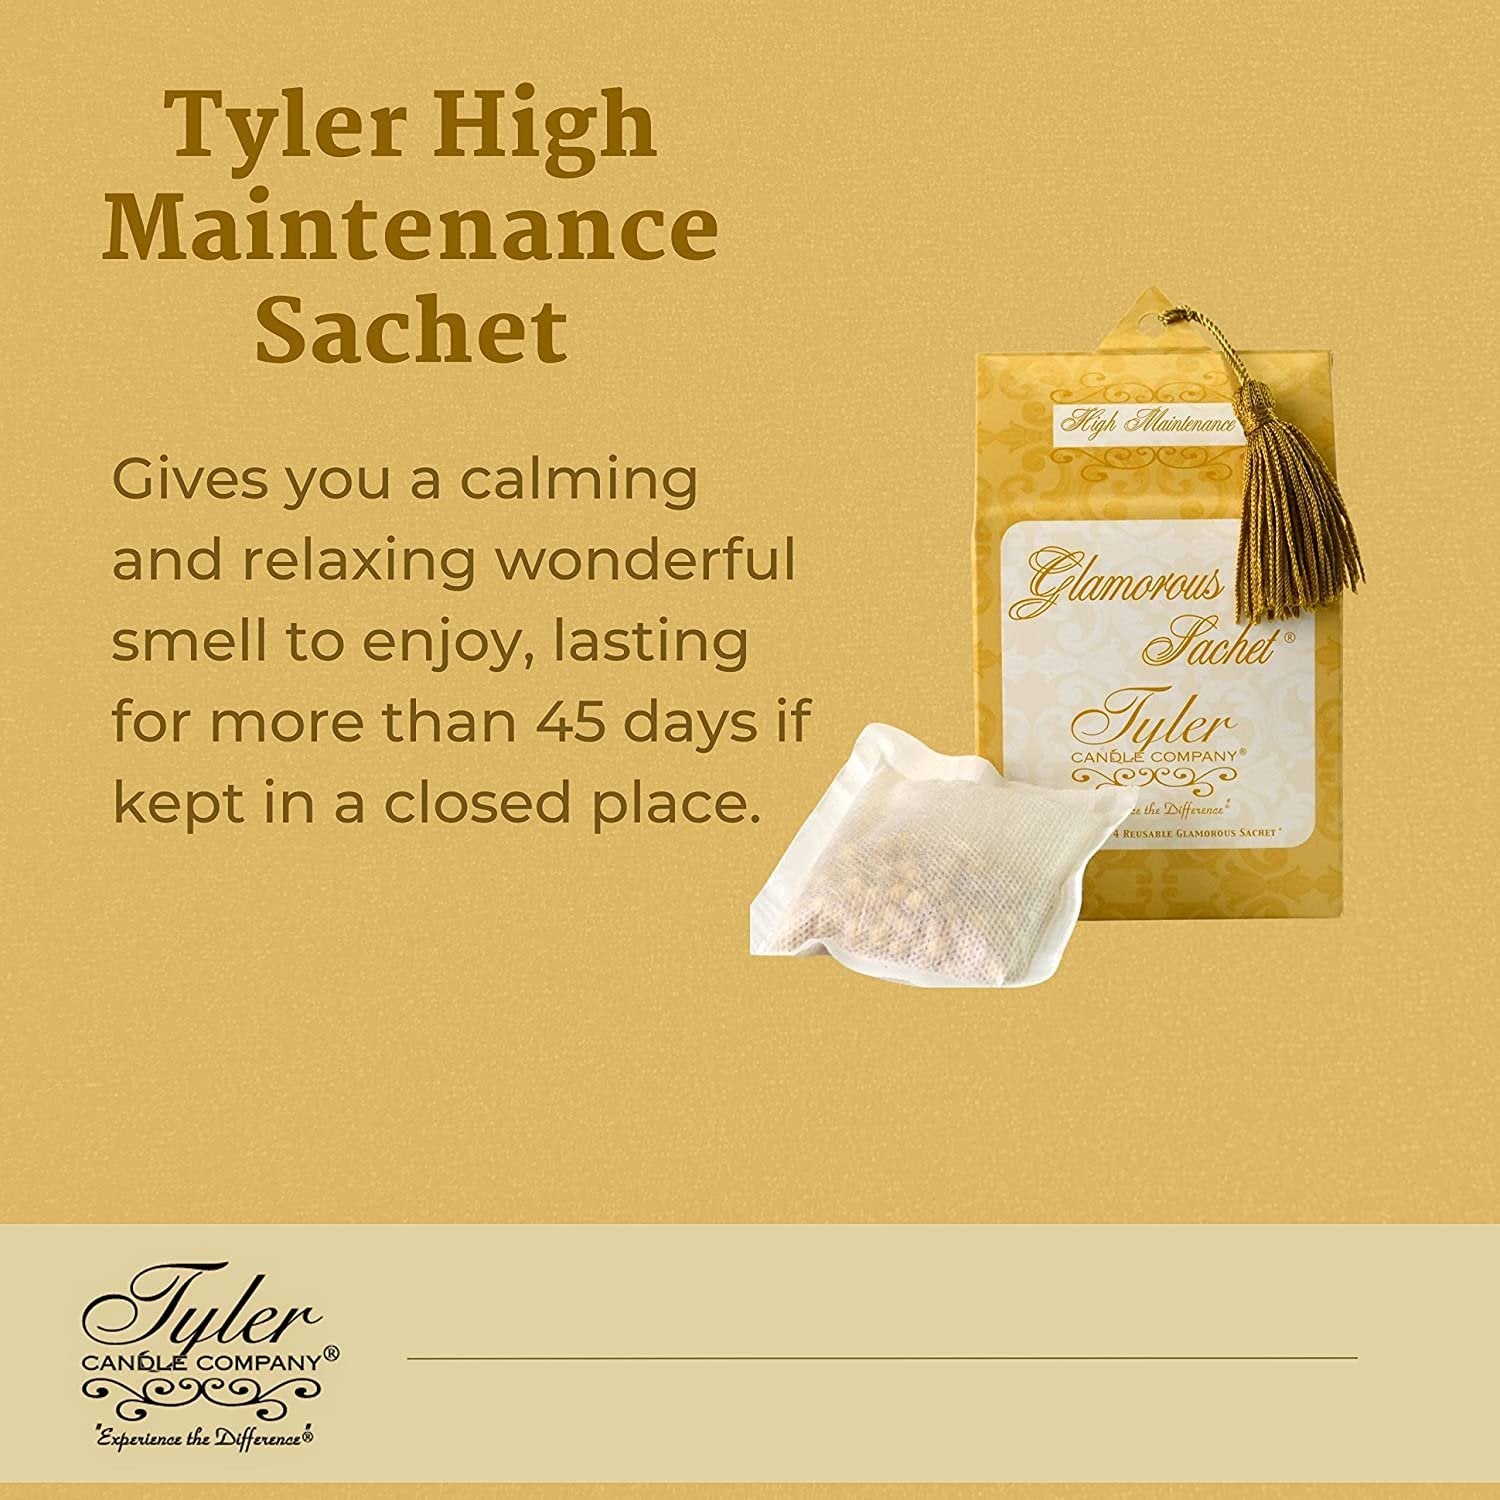 Tyler Candle Company High Maintenance Dryer Sheet Sachets - Glamorous Reusable Dryer Sheets - Sachets for Drawers and Closets - 1 Pack, 4 Sachets, Dryer, Home, or Personal Sachet, with Bonus Key Chain